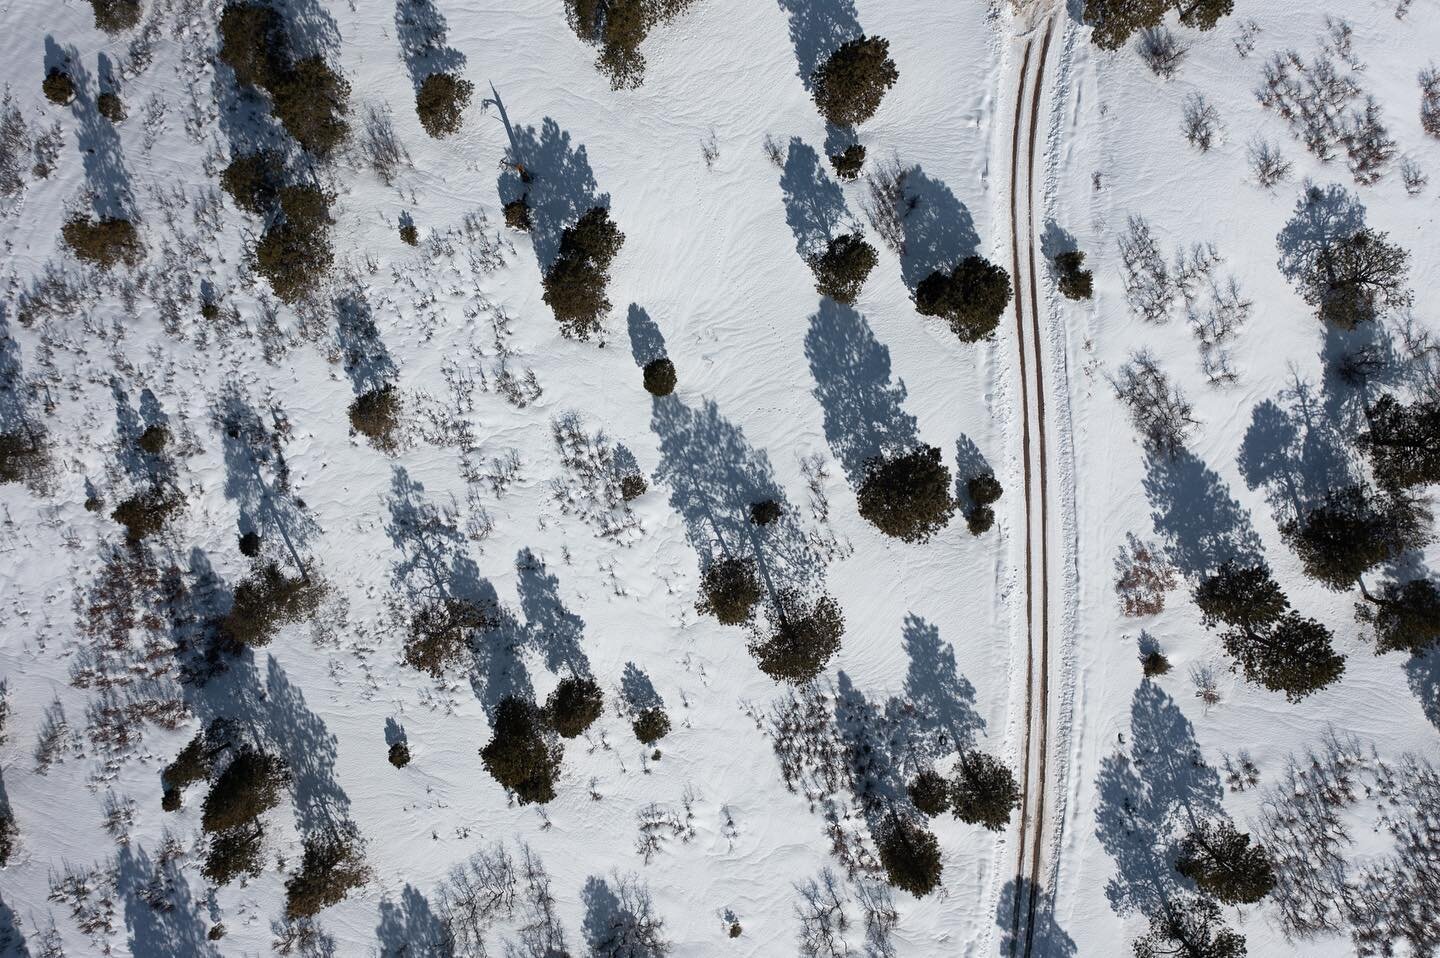 Shots from a snowy site visit to our new project in Durango Ridges. Our client has charged us to design around the mature pines that dot the site. The trees offer an opportunity to carefully frame views, which you can see in the video that was taken 